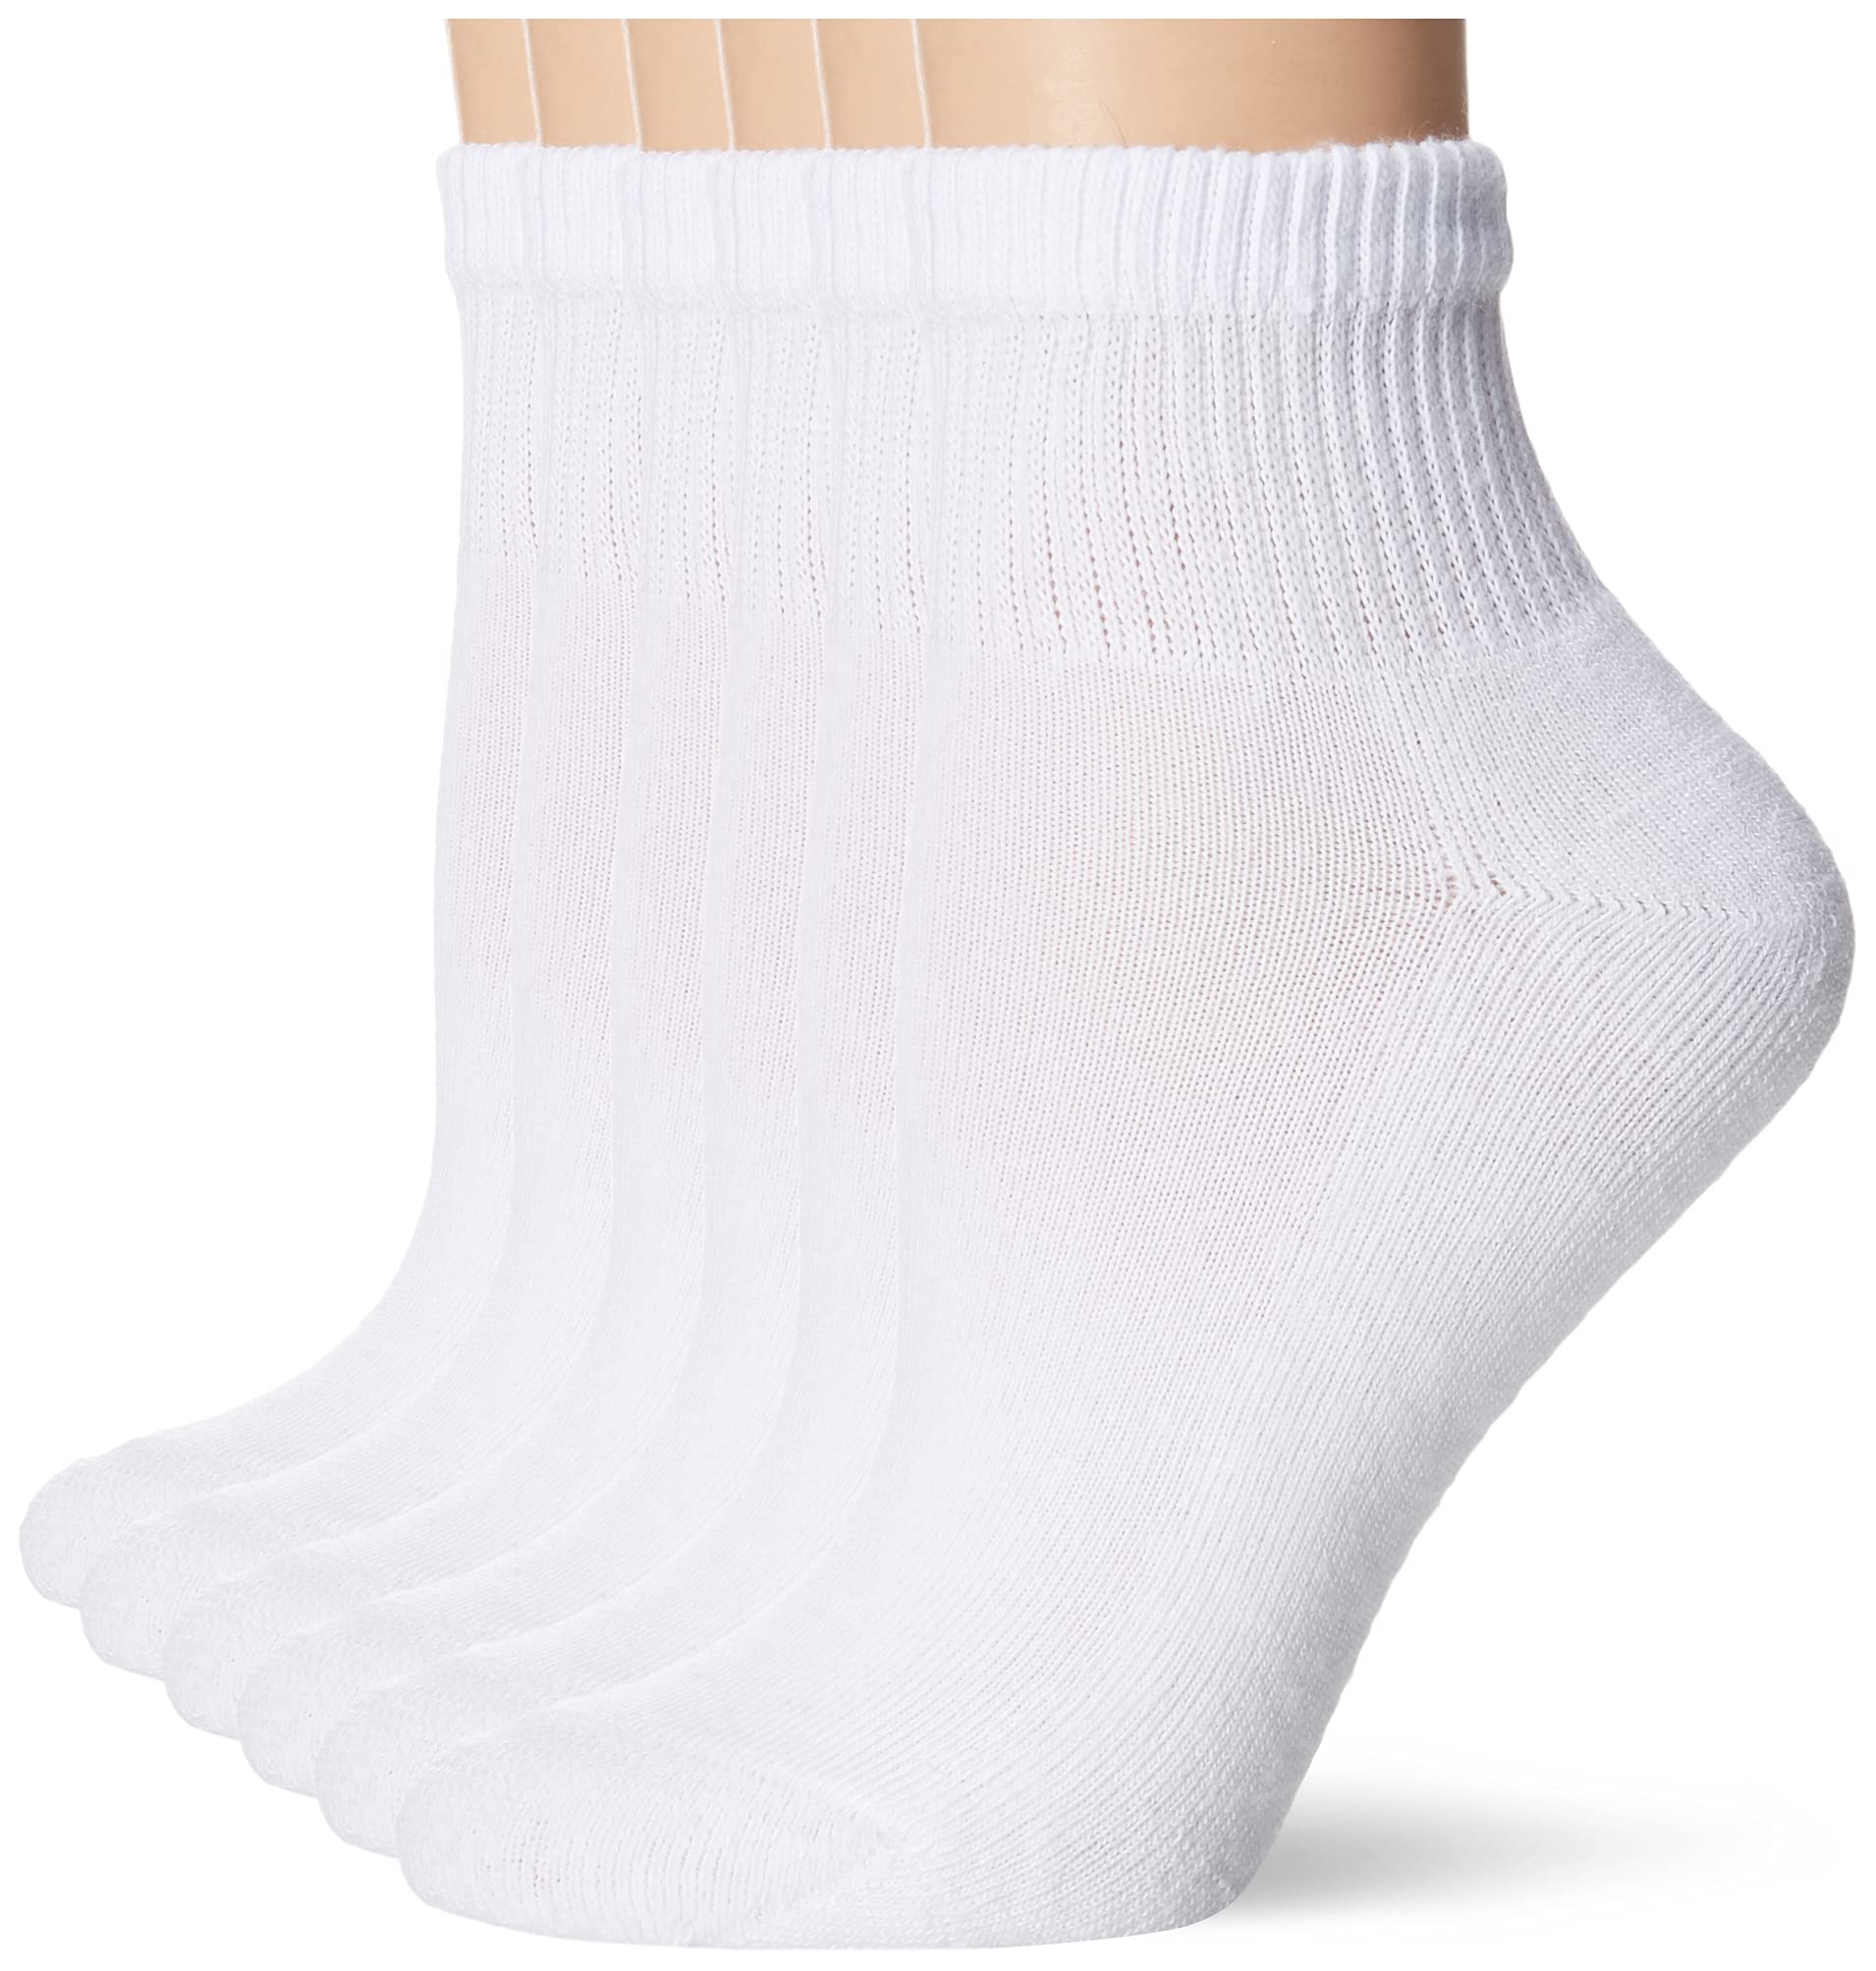 Hanes Women's Value, Ankle Soft Moisture-Wicking Socks, Available in 10 and 14-Packs